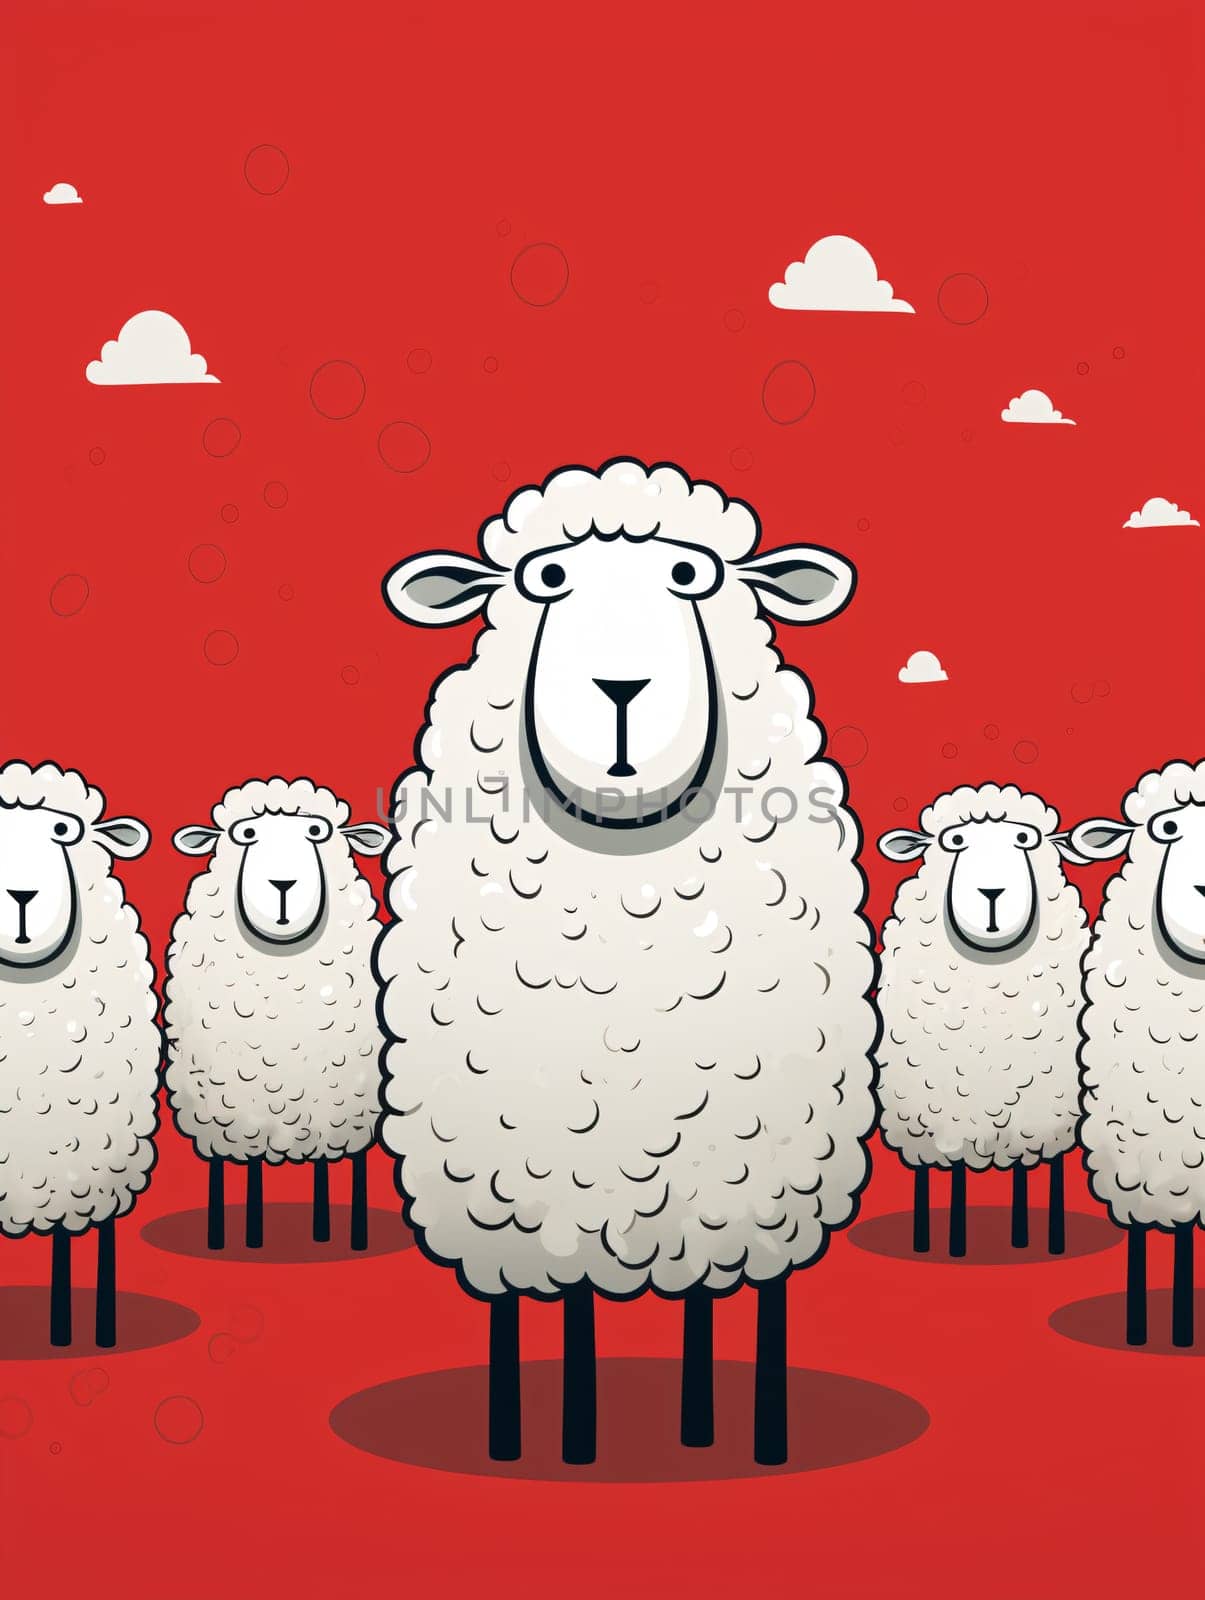 Vibrant and playful, a flock of cartoon sheep leaps through a red-hued world, brought to life through lively illustration and charming mammalian energy